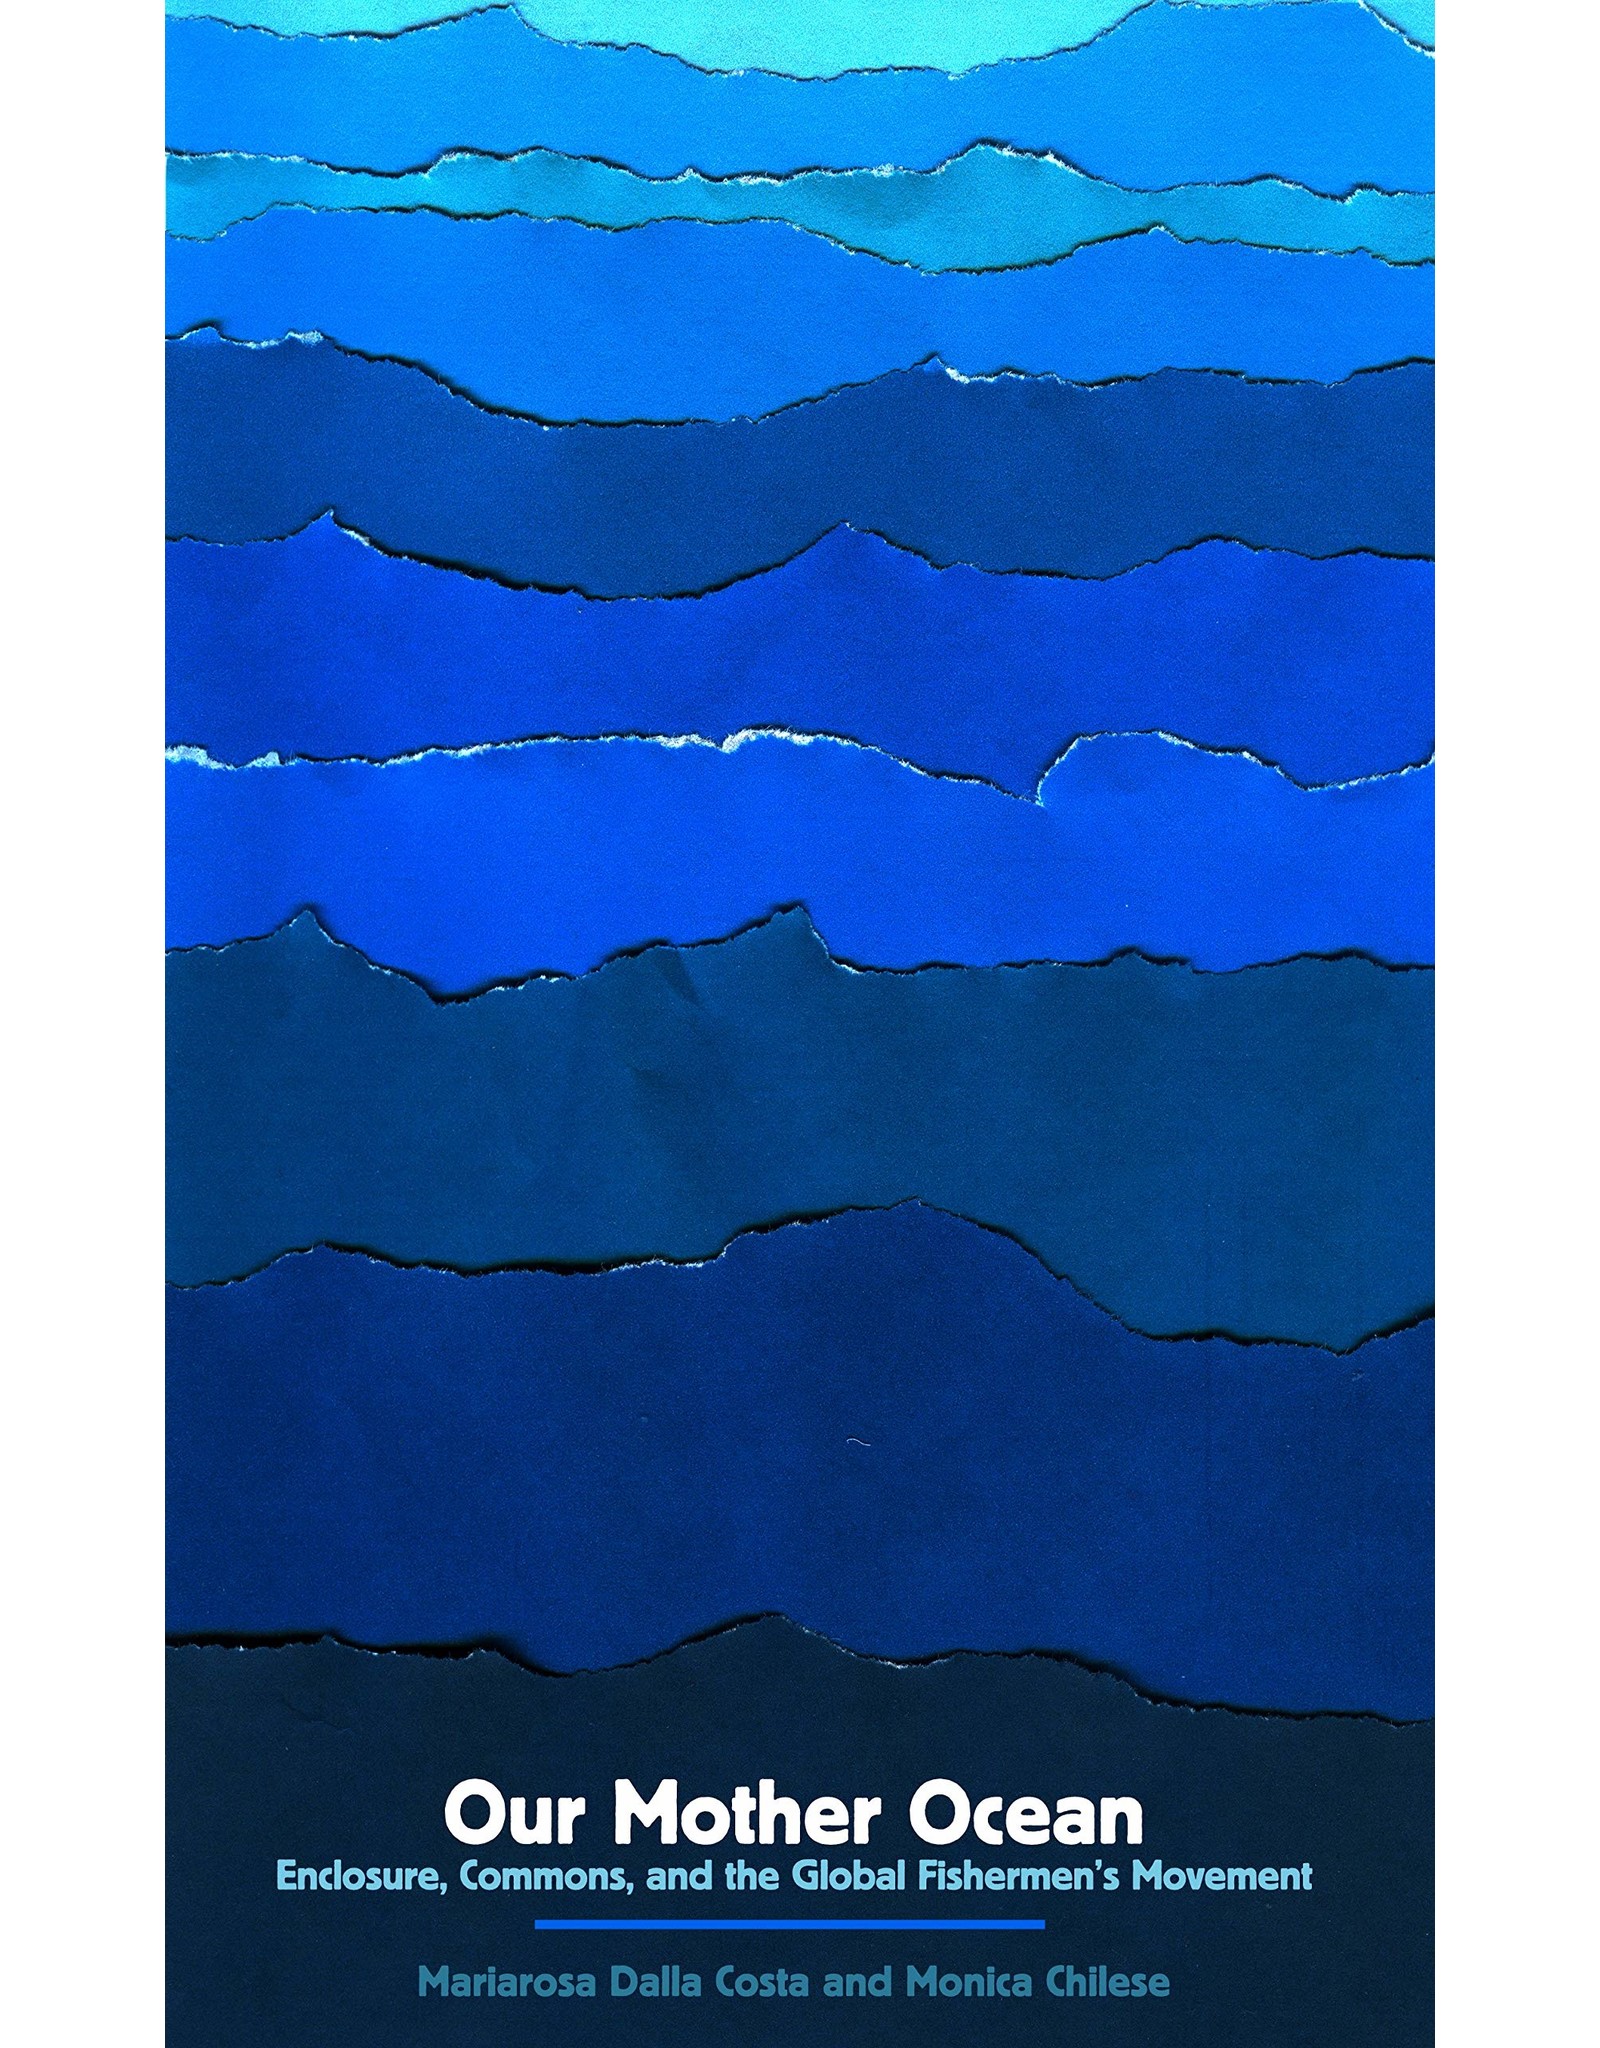 Literature Our Mother Ocean: Enclosure, Commons, and the Global Fishermen's Movement